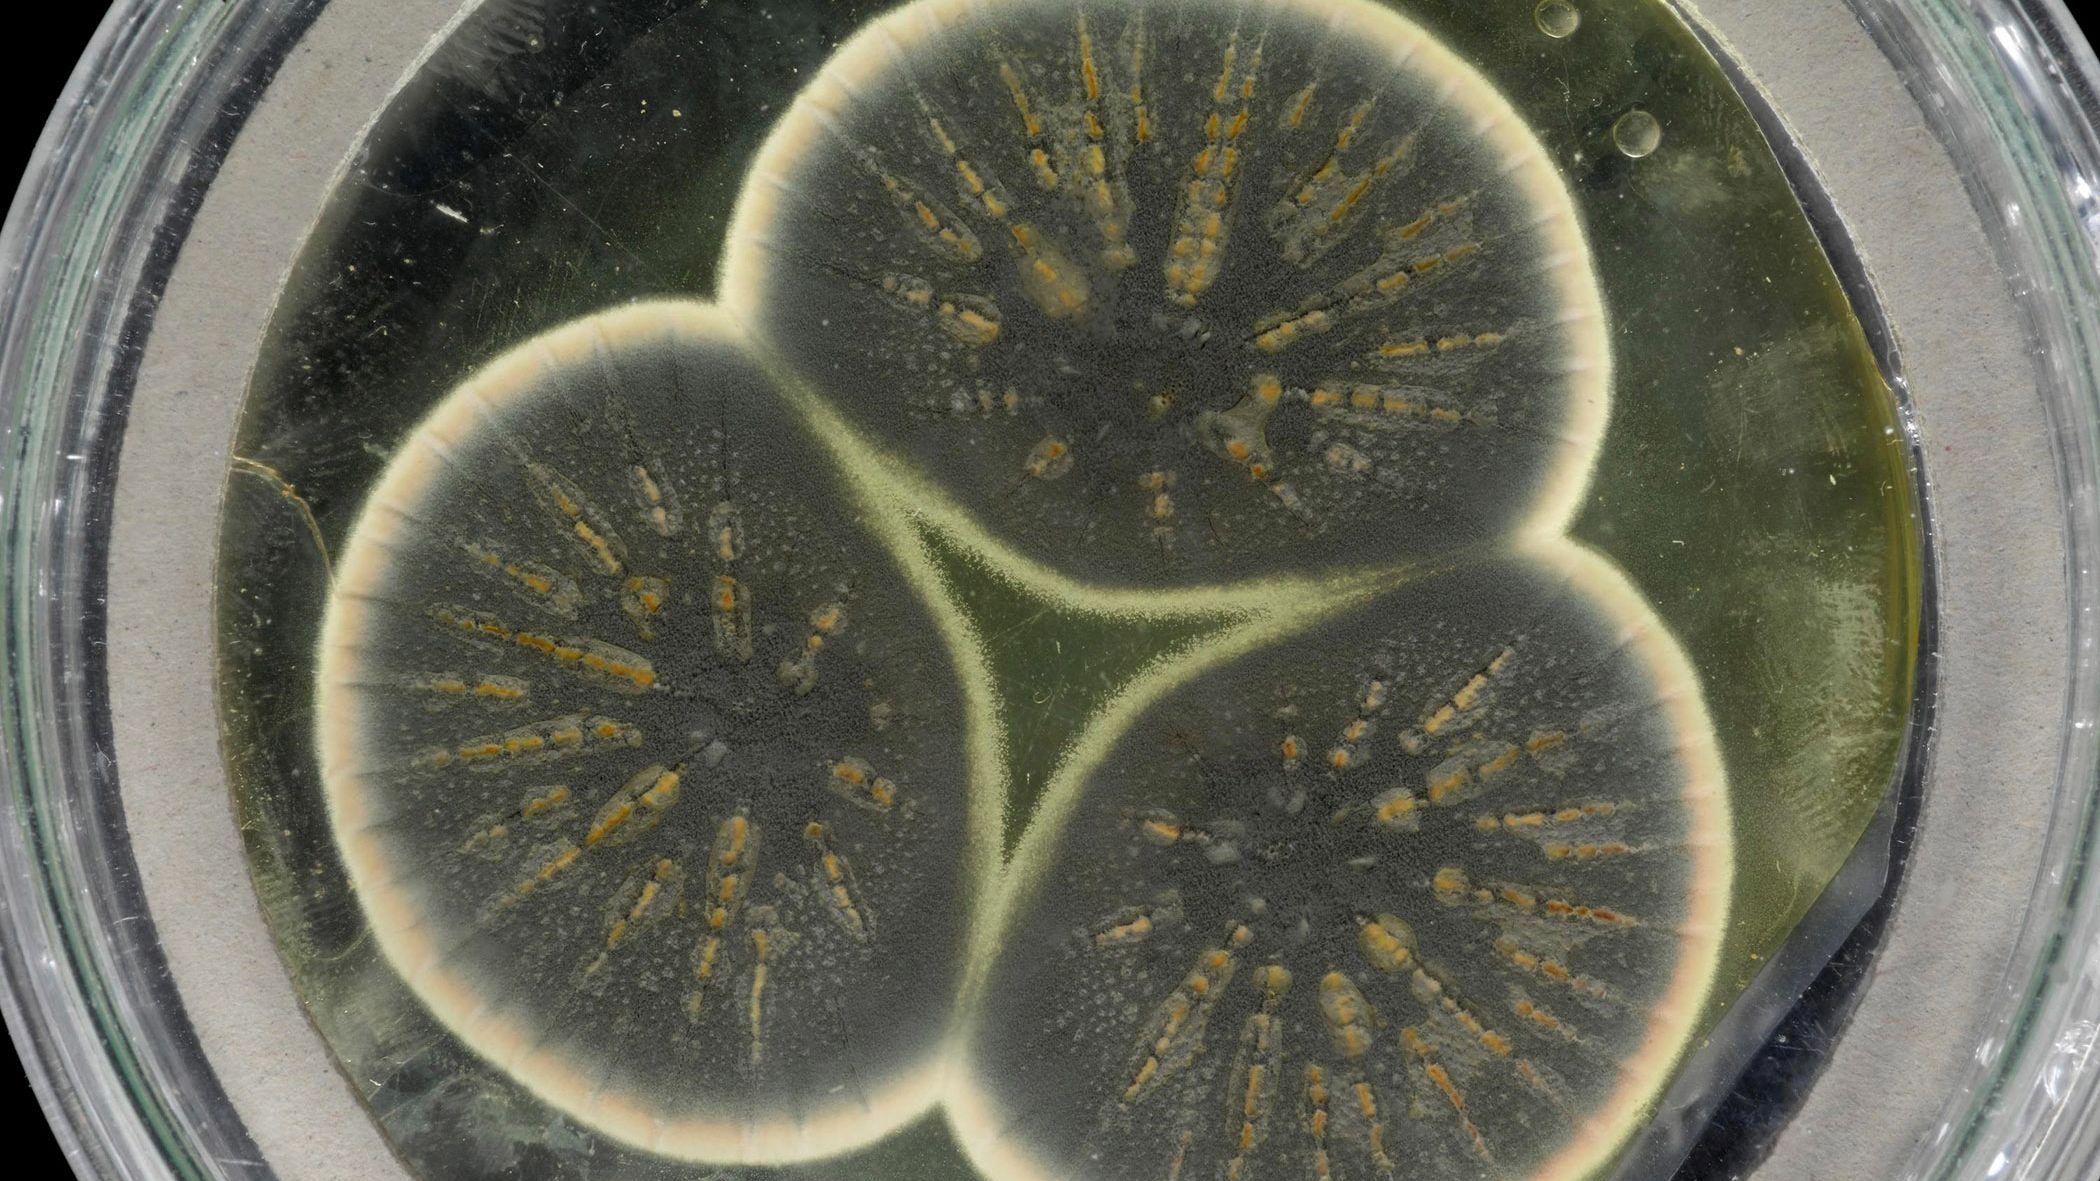 This mold was regrown from Alexander Fleming's frozen sample that produced the first antibiotic, penicillin.